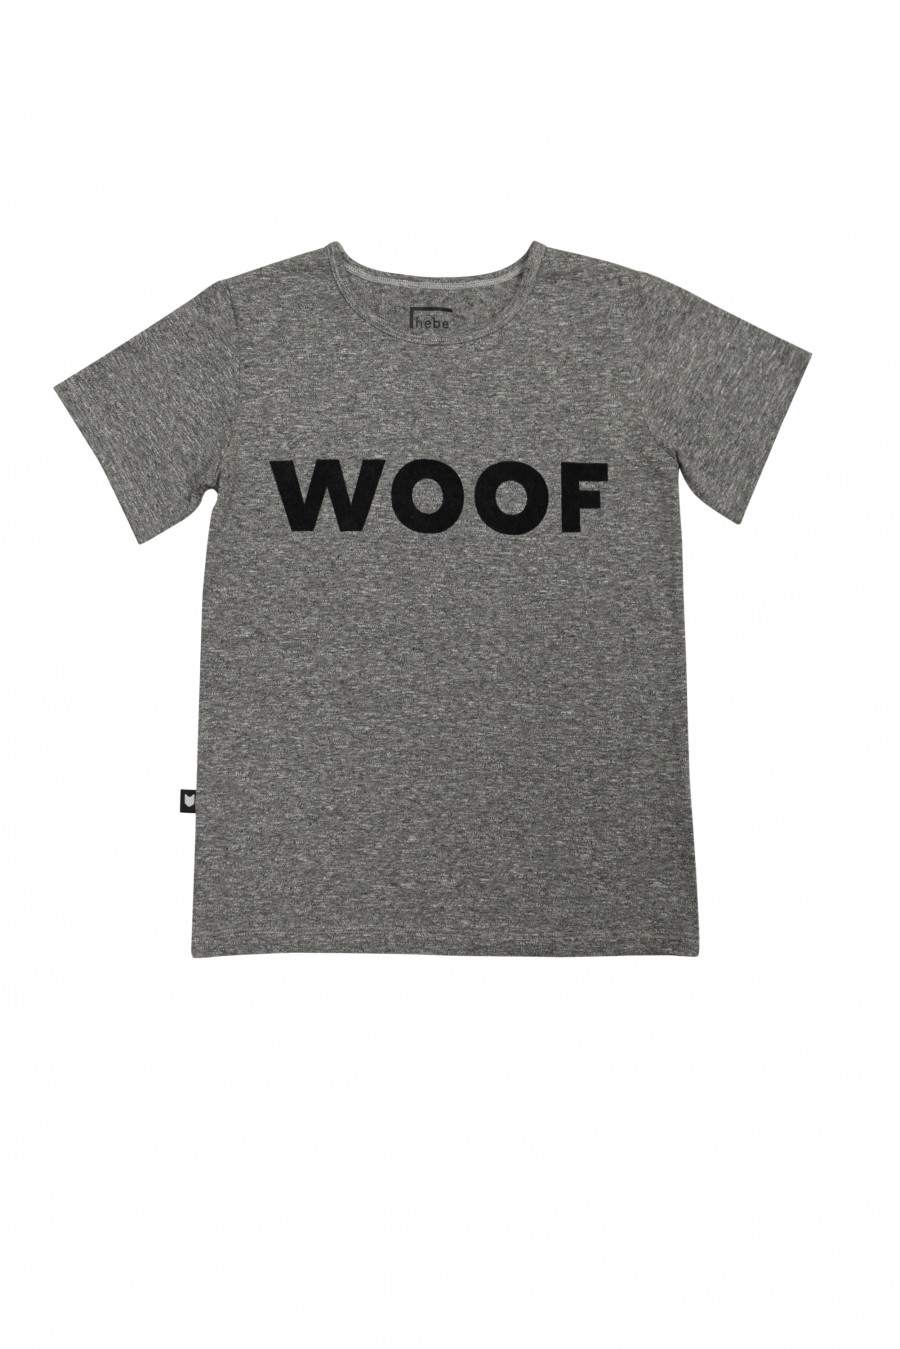 Grey top with woof FW18153